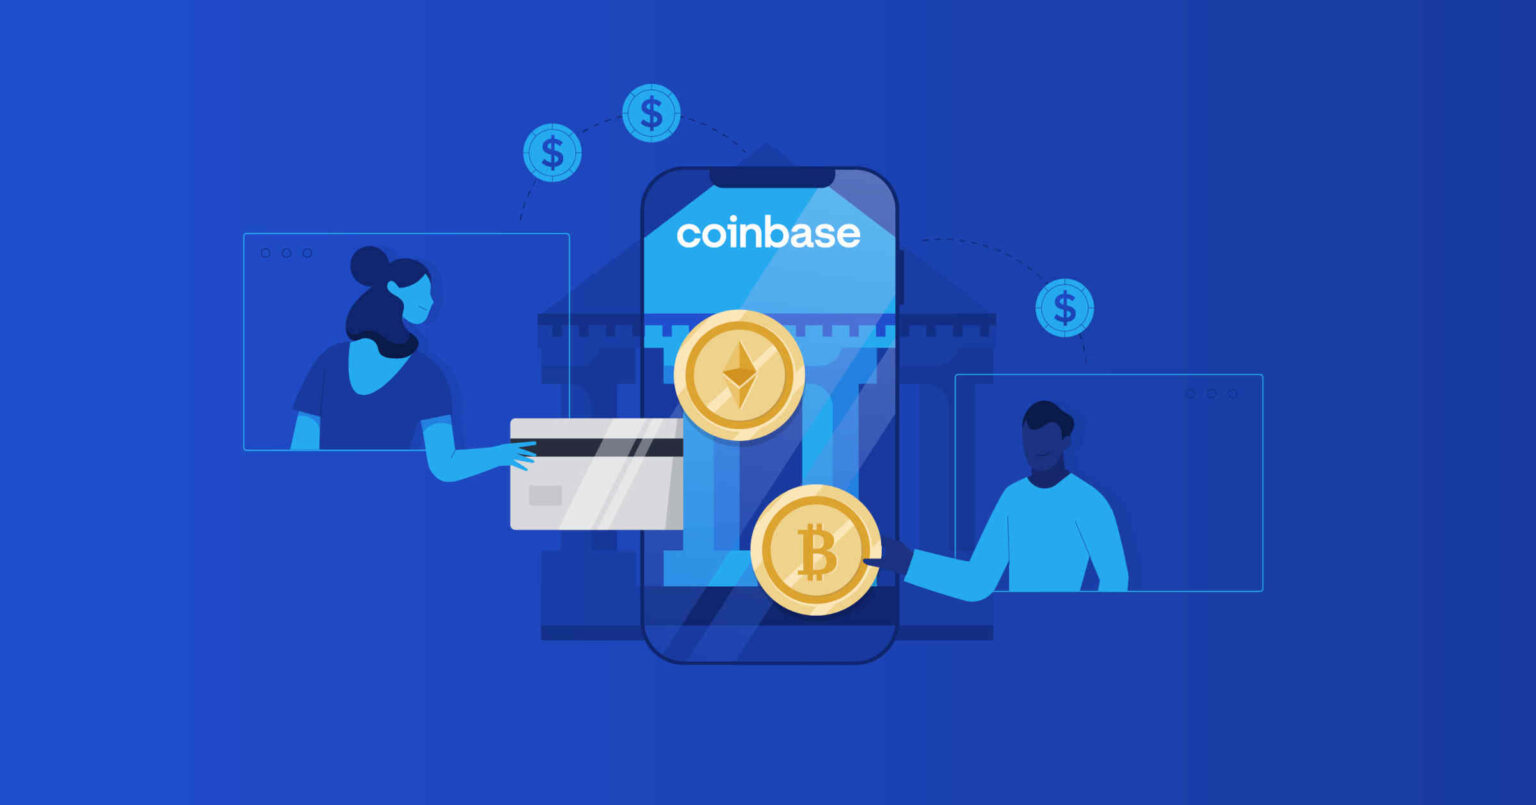 How easy is it to start using cryptocurrency? What countries accept it? Grab a pen and take notes as you learn these Coinbase facts and more!